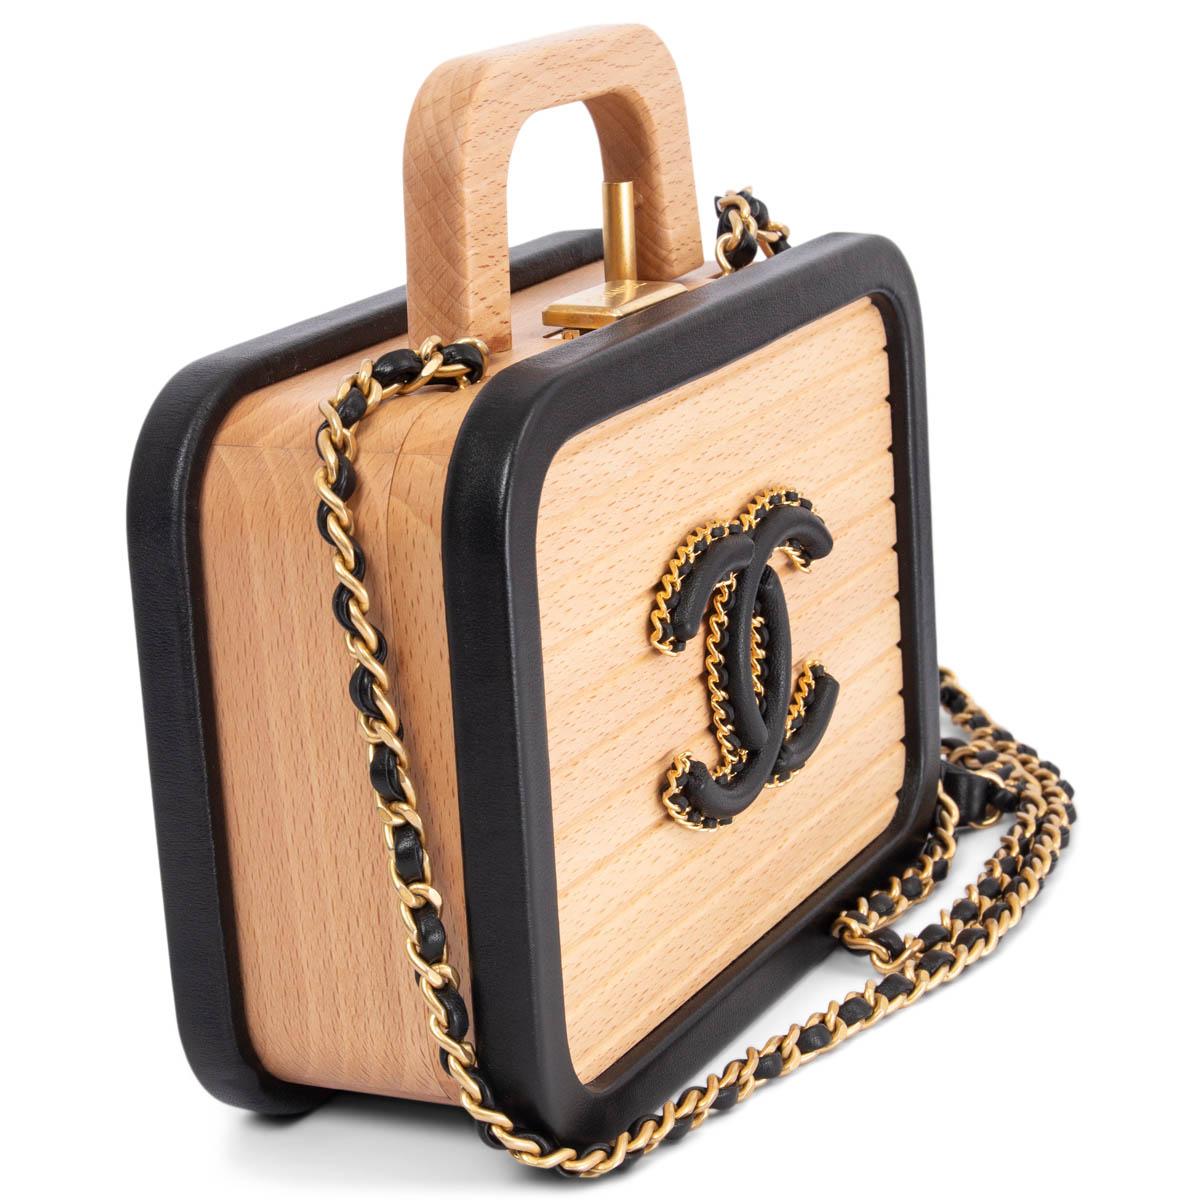 100% authentic Rare limited edition Chanel Small Vanity bag in beige beech wood with black leather trims and antique gold-tone hardware. Opens with a logo clasp closure and is lined in black quilted calfskin and wood with one quilted classic flap